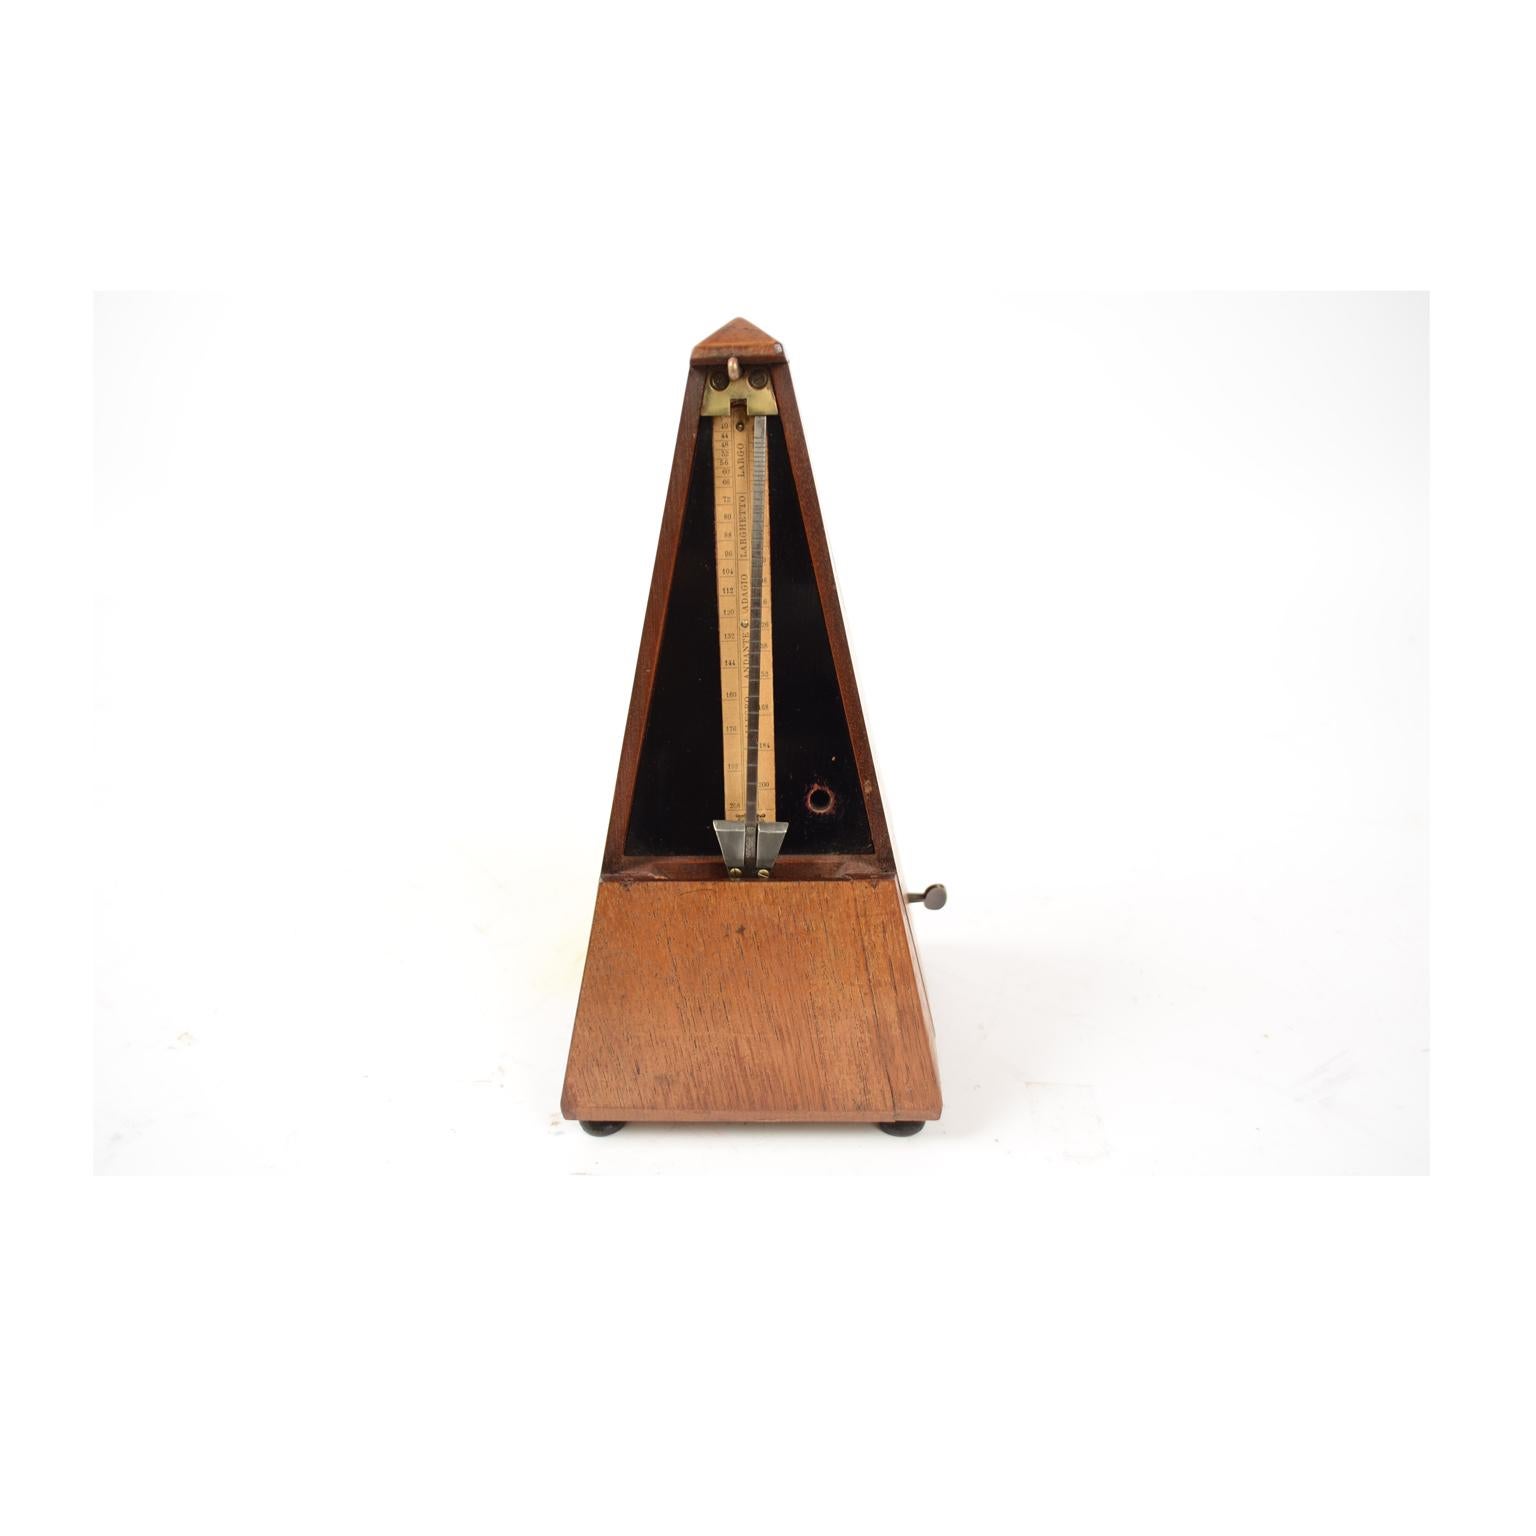 Metronome system Johan Maelzel of the late 19th century. It is an instrument used to measure the Tempo of music, the sound of the pendulum accurately signals the speed of execution. The instrument consists of a pendulum with counterweight that works